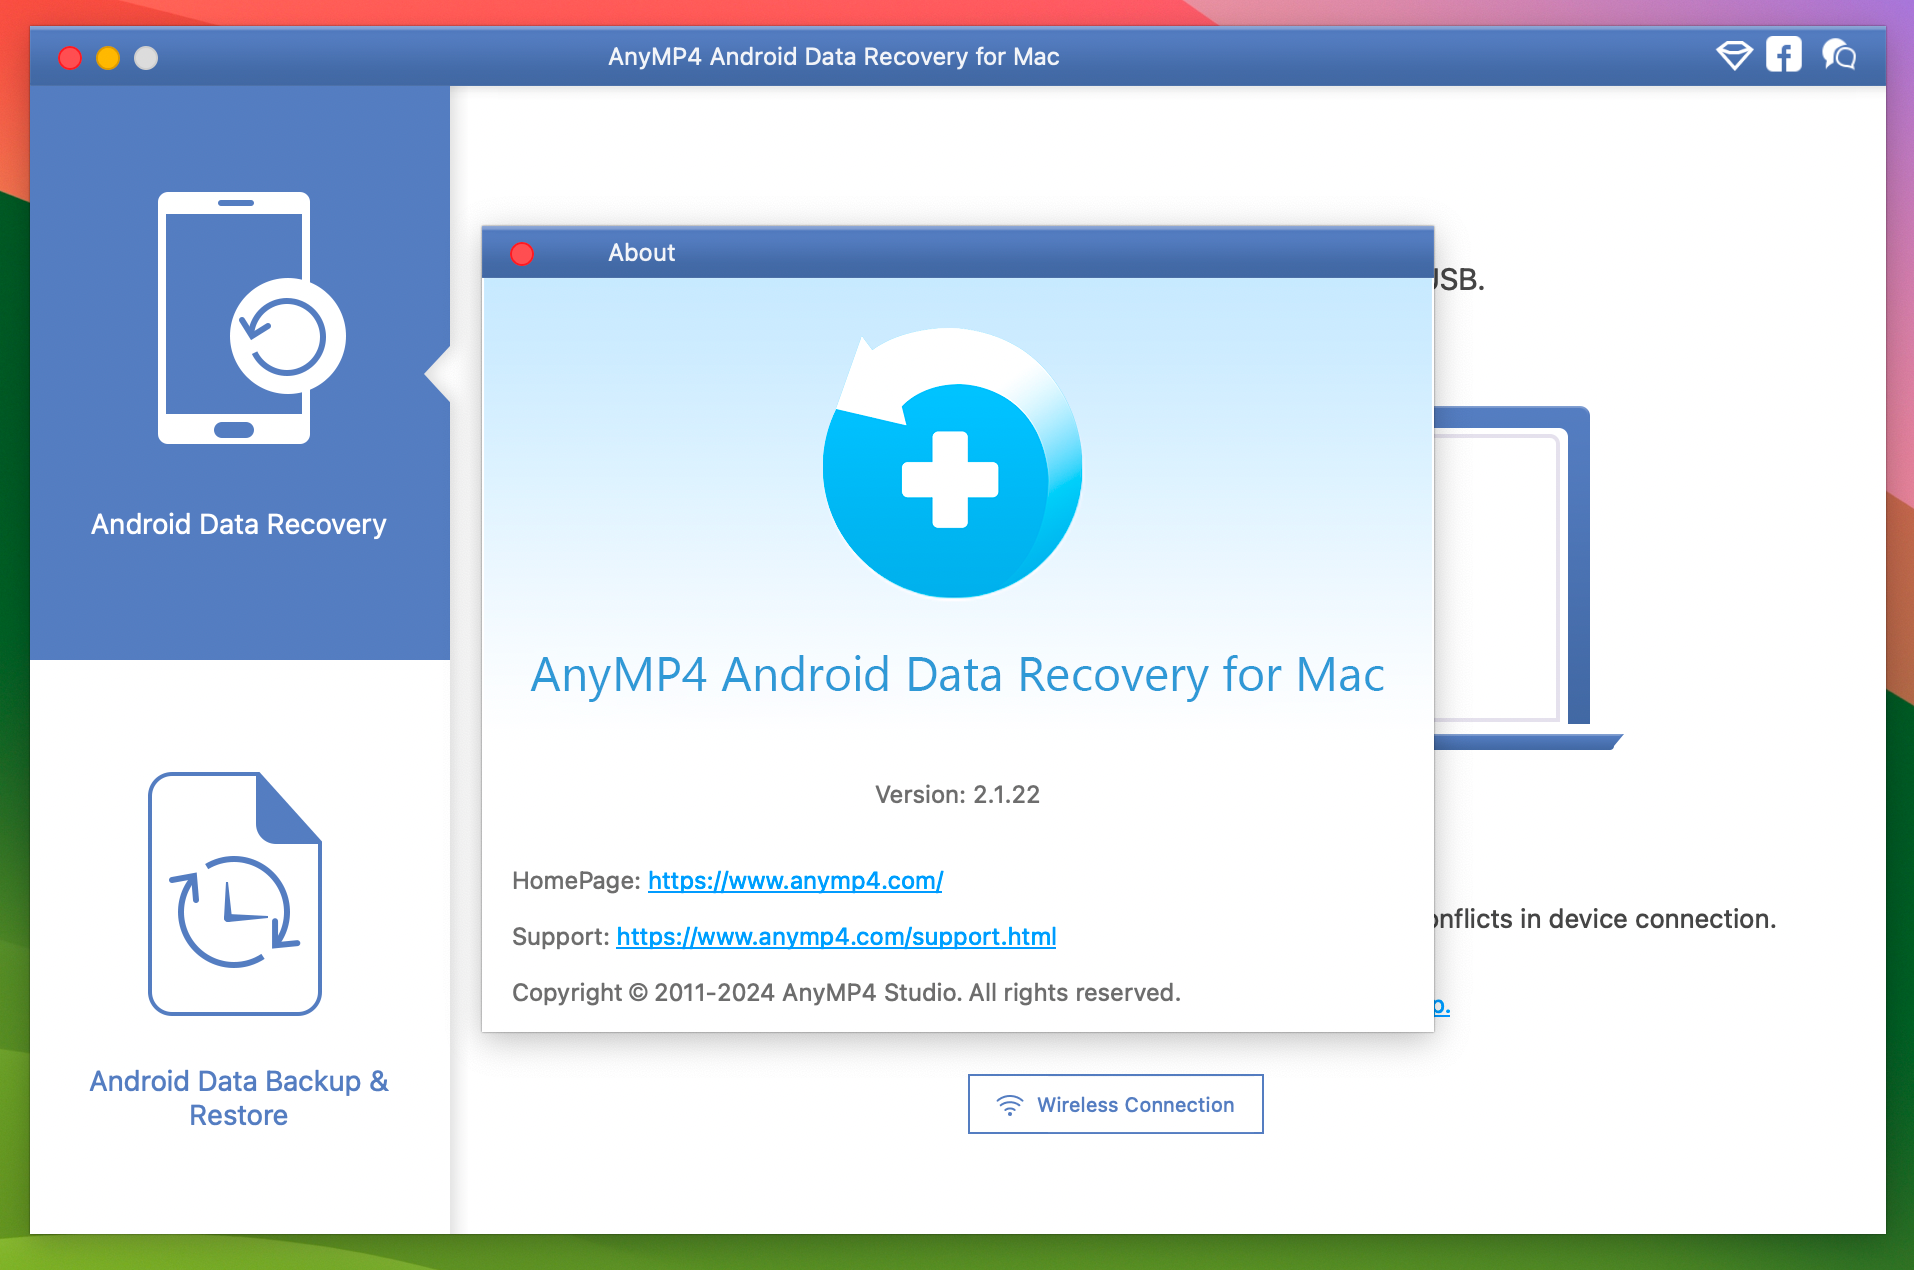 AnyMP4 Android Data Recovery for Mac v2.1.16 安卓数据恢复软件 免激活下载-1